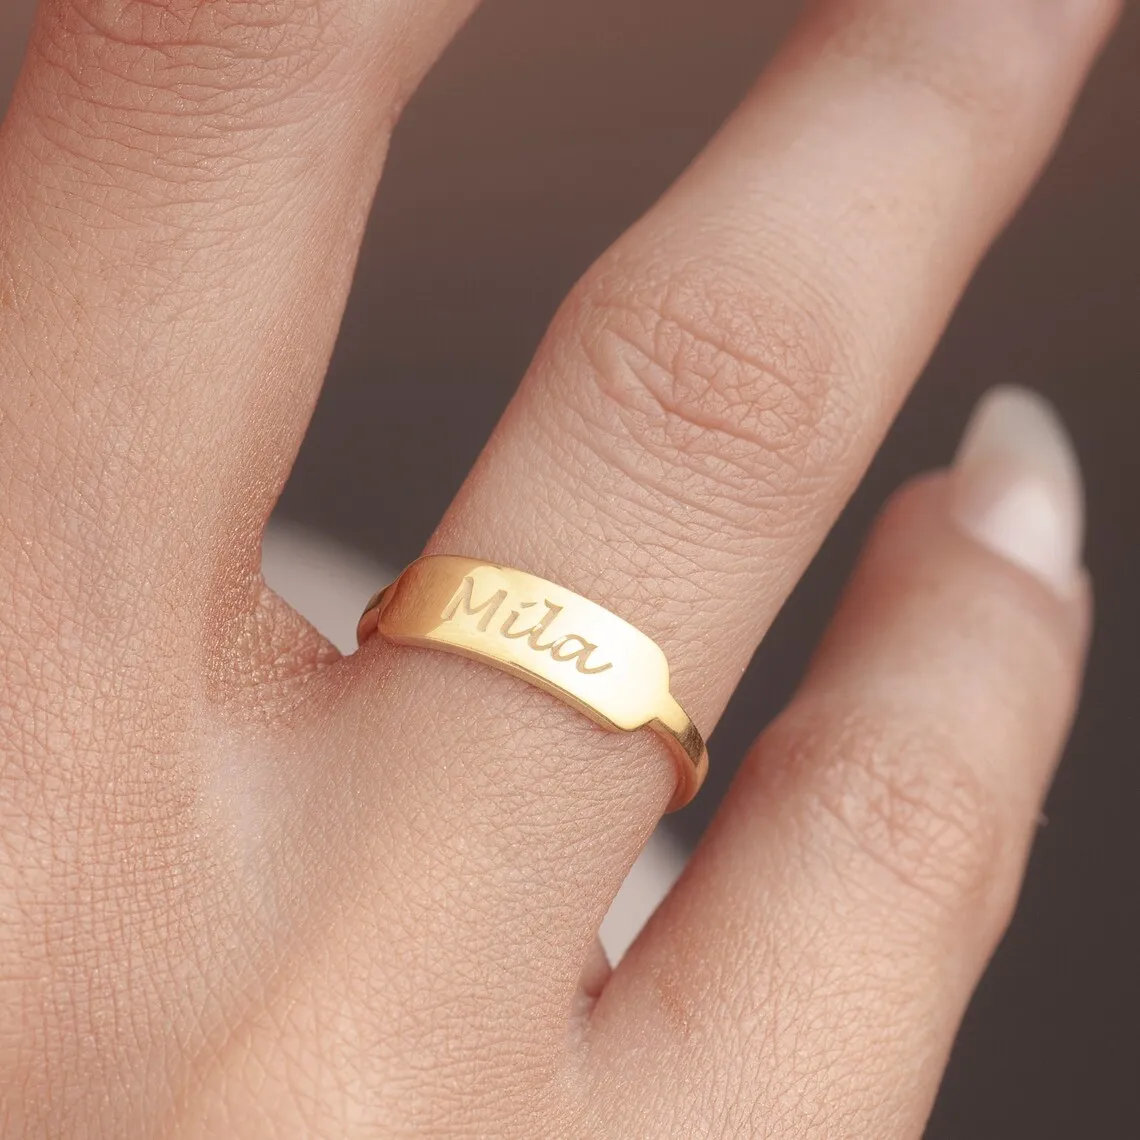 

Custom Engraved Name Rings For Women Girl Jewelry Stainless Steel Personalized Nameplate Finger Rings Wedding Gifts For Her